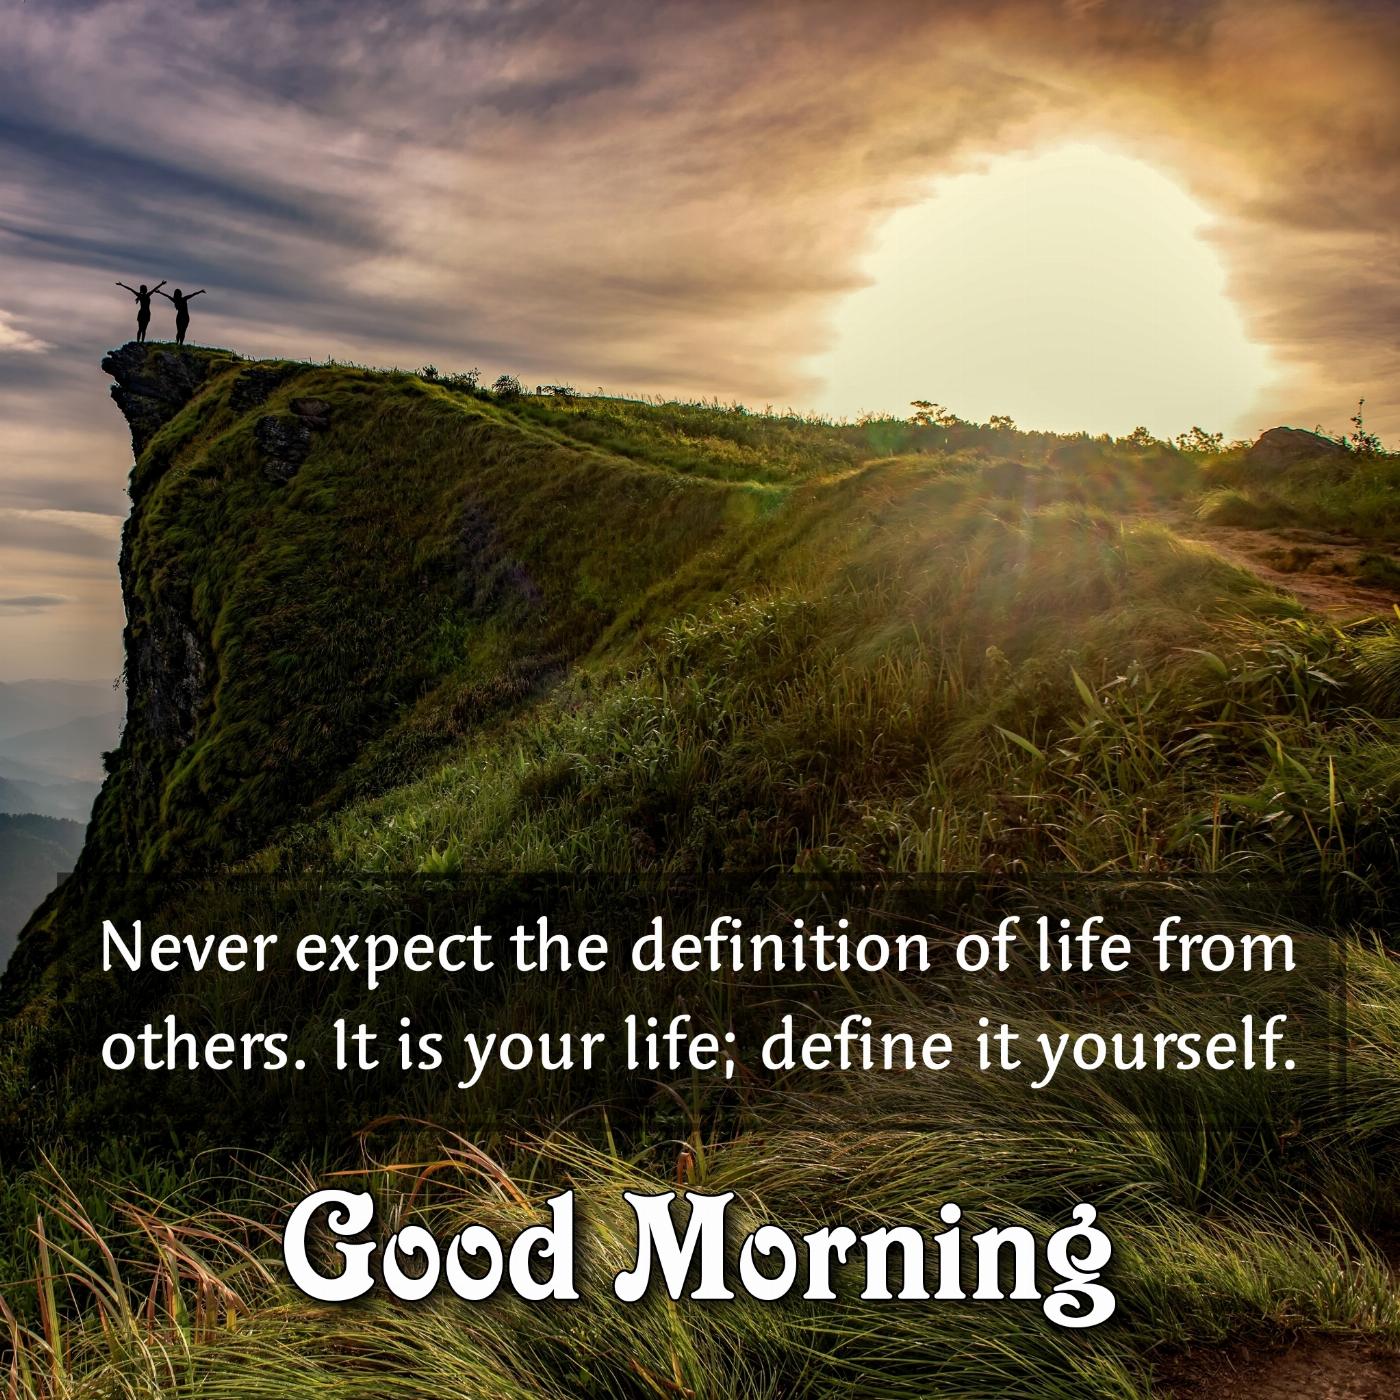 Never expect the definition of life from others